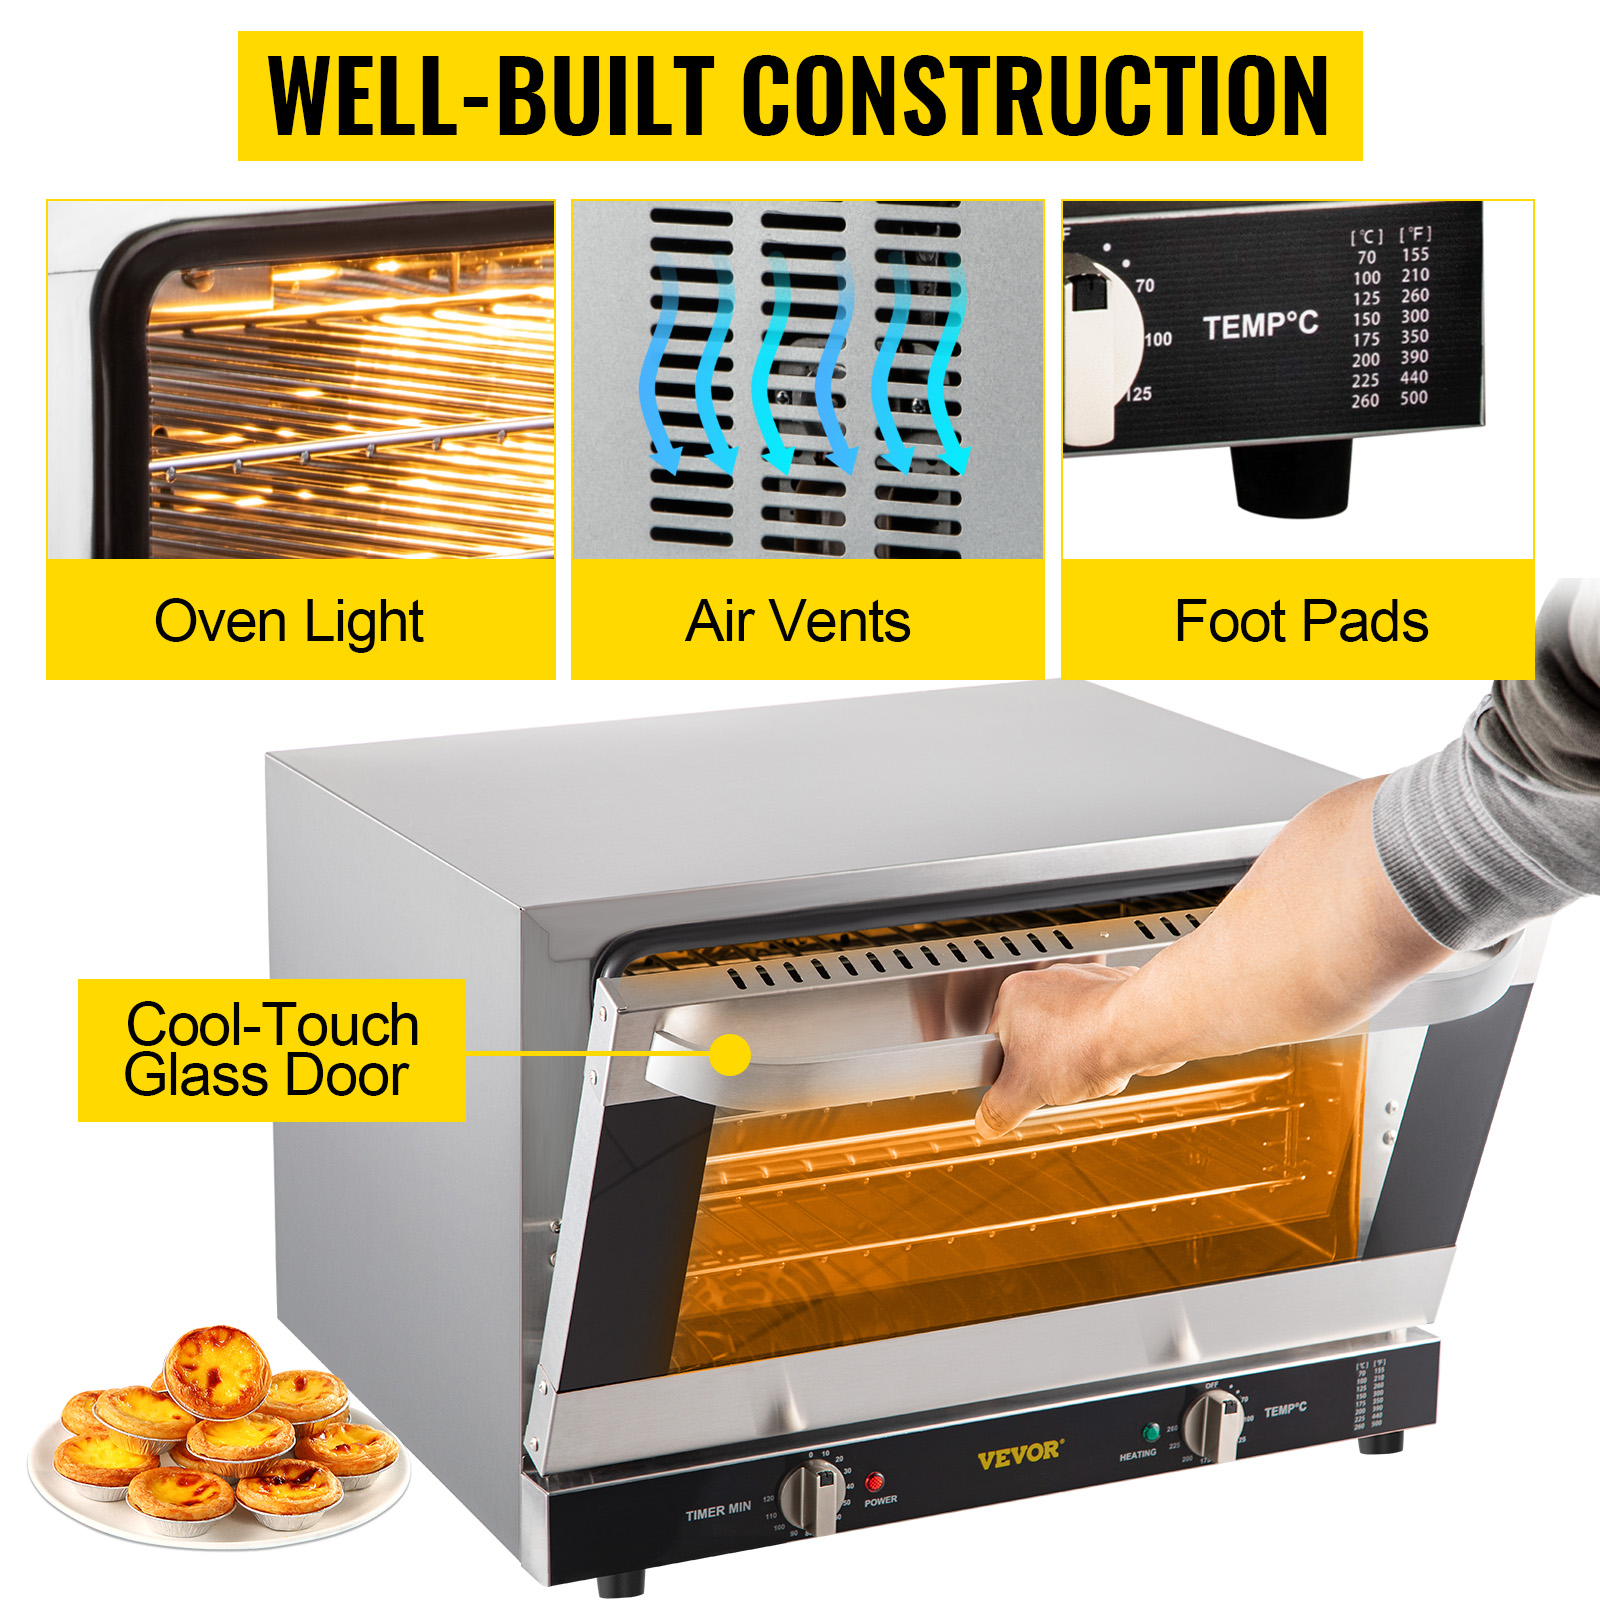 https://d2qc09rl1gfuof.cloudfront.net/product/RFXHLM40L110V9SYS/commercial-convection-oven-m100-5.jpg